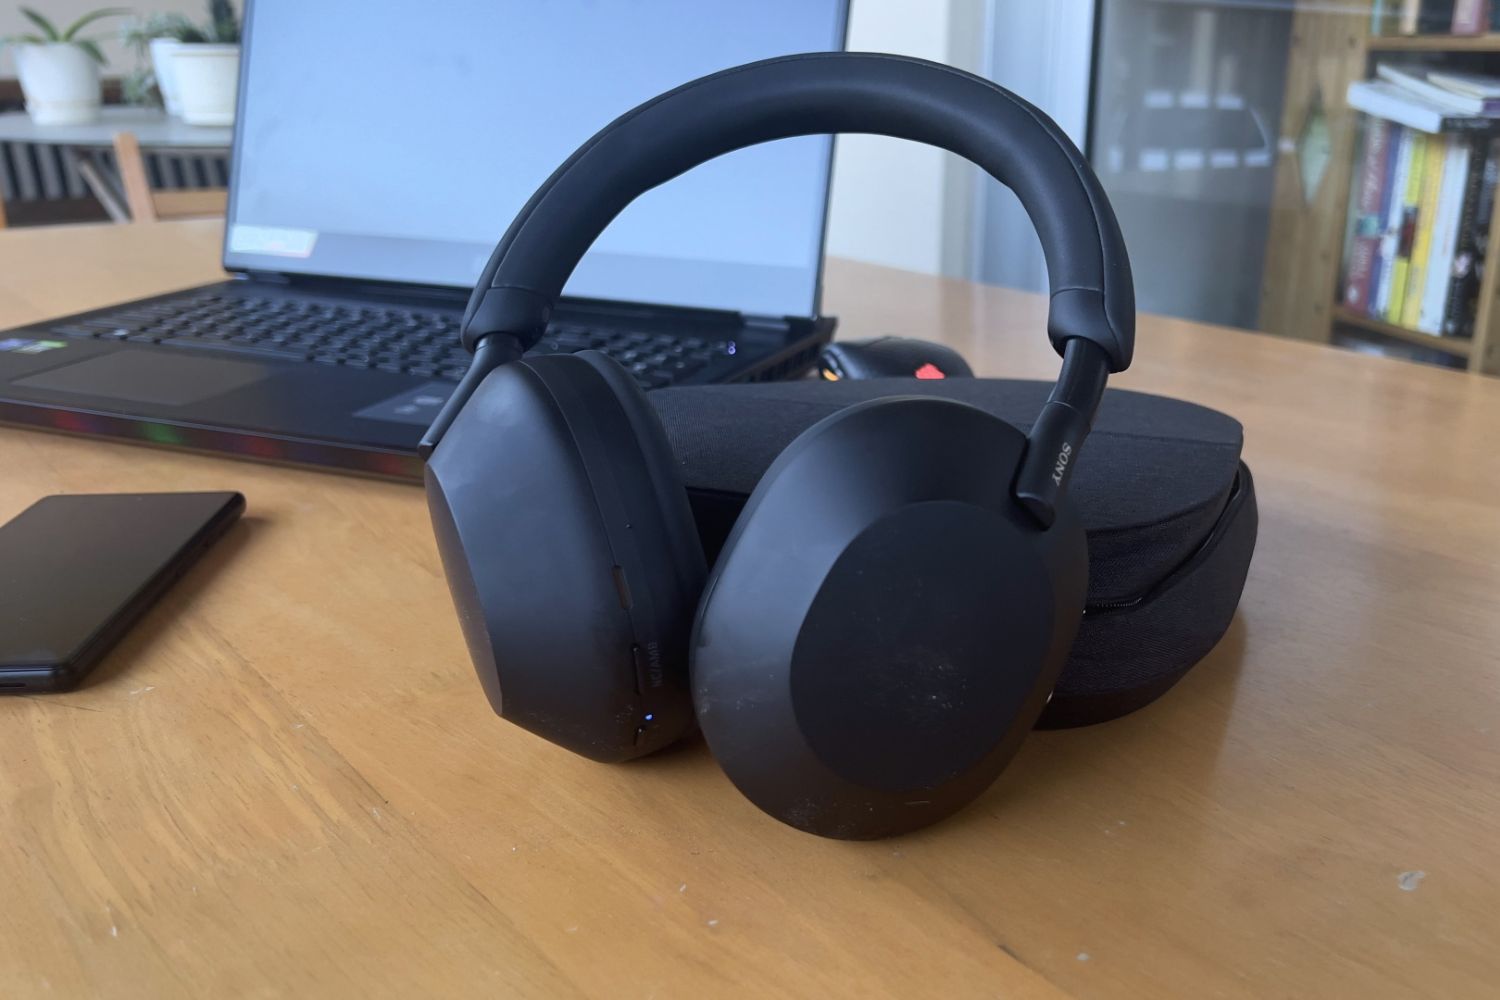 Sony Wireless Noise Cancelling Headphones: How To Sync To Computer